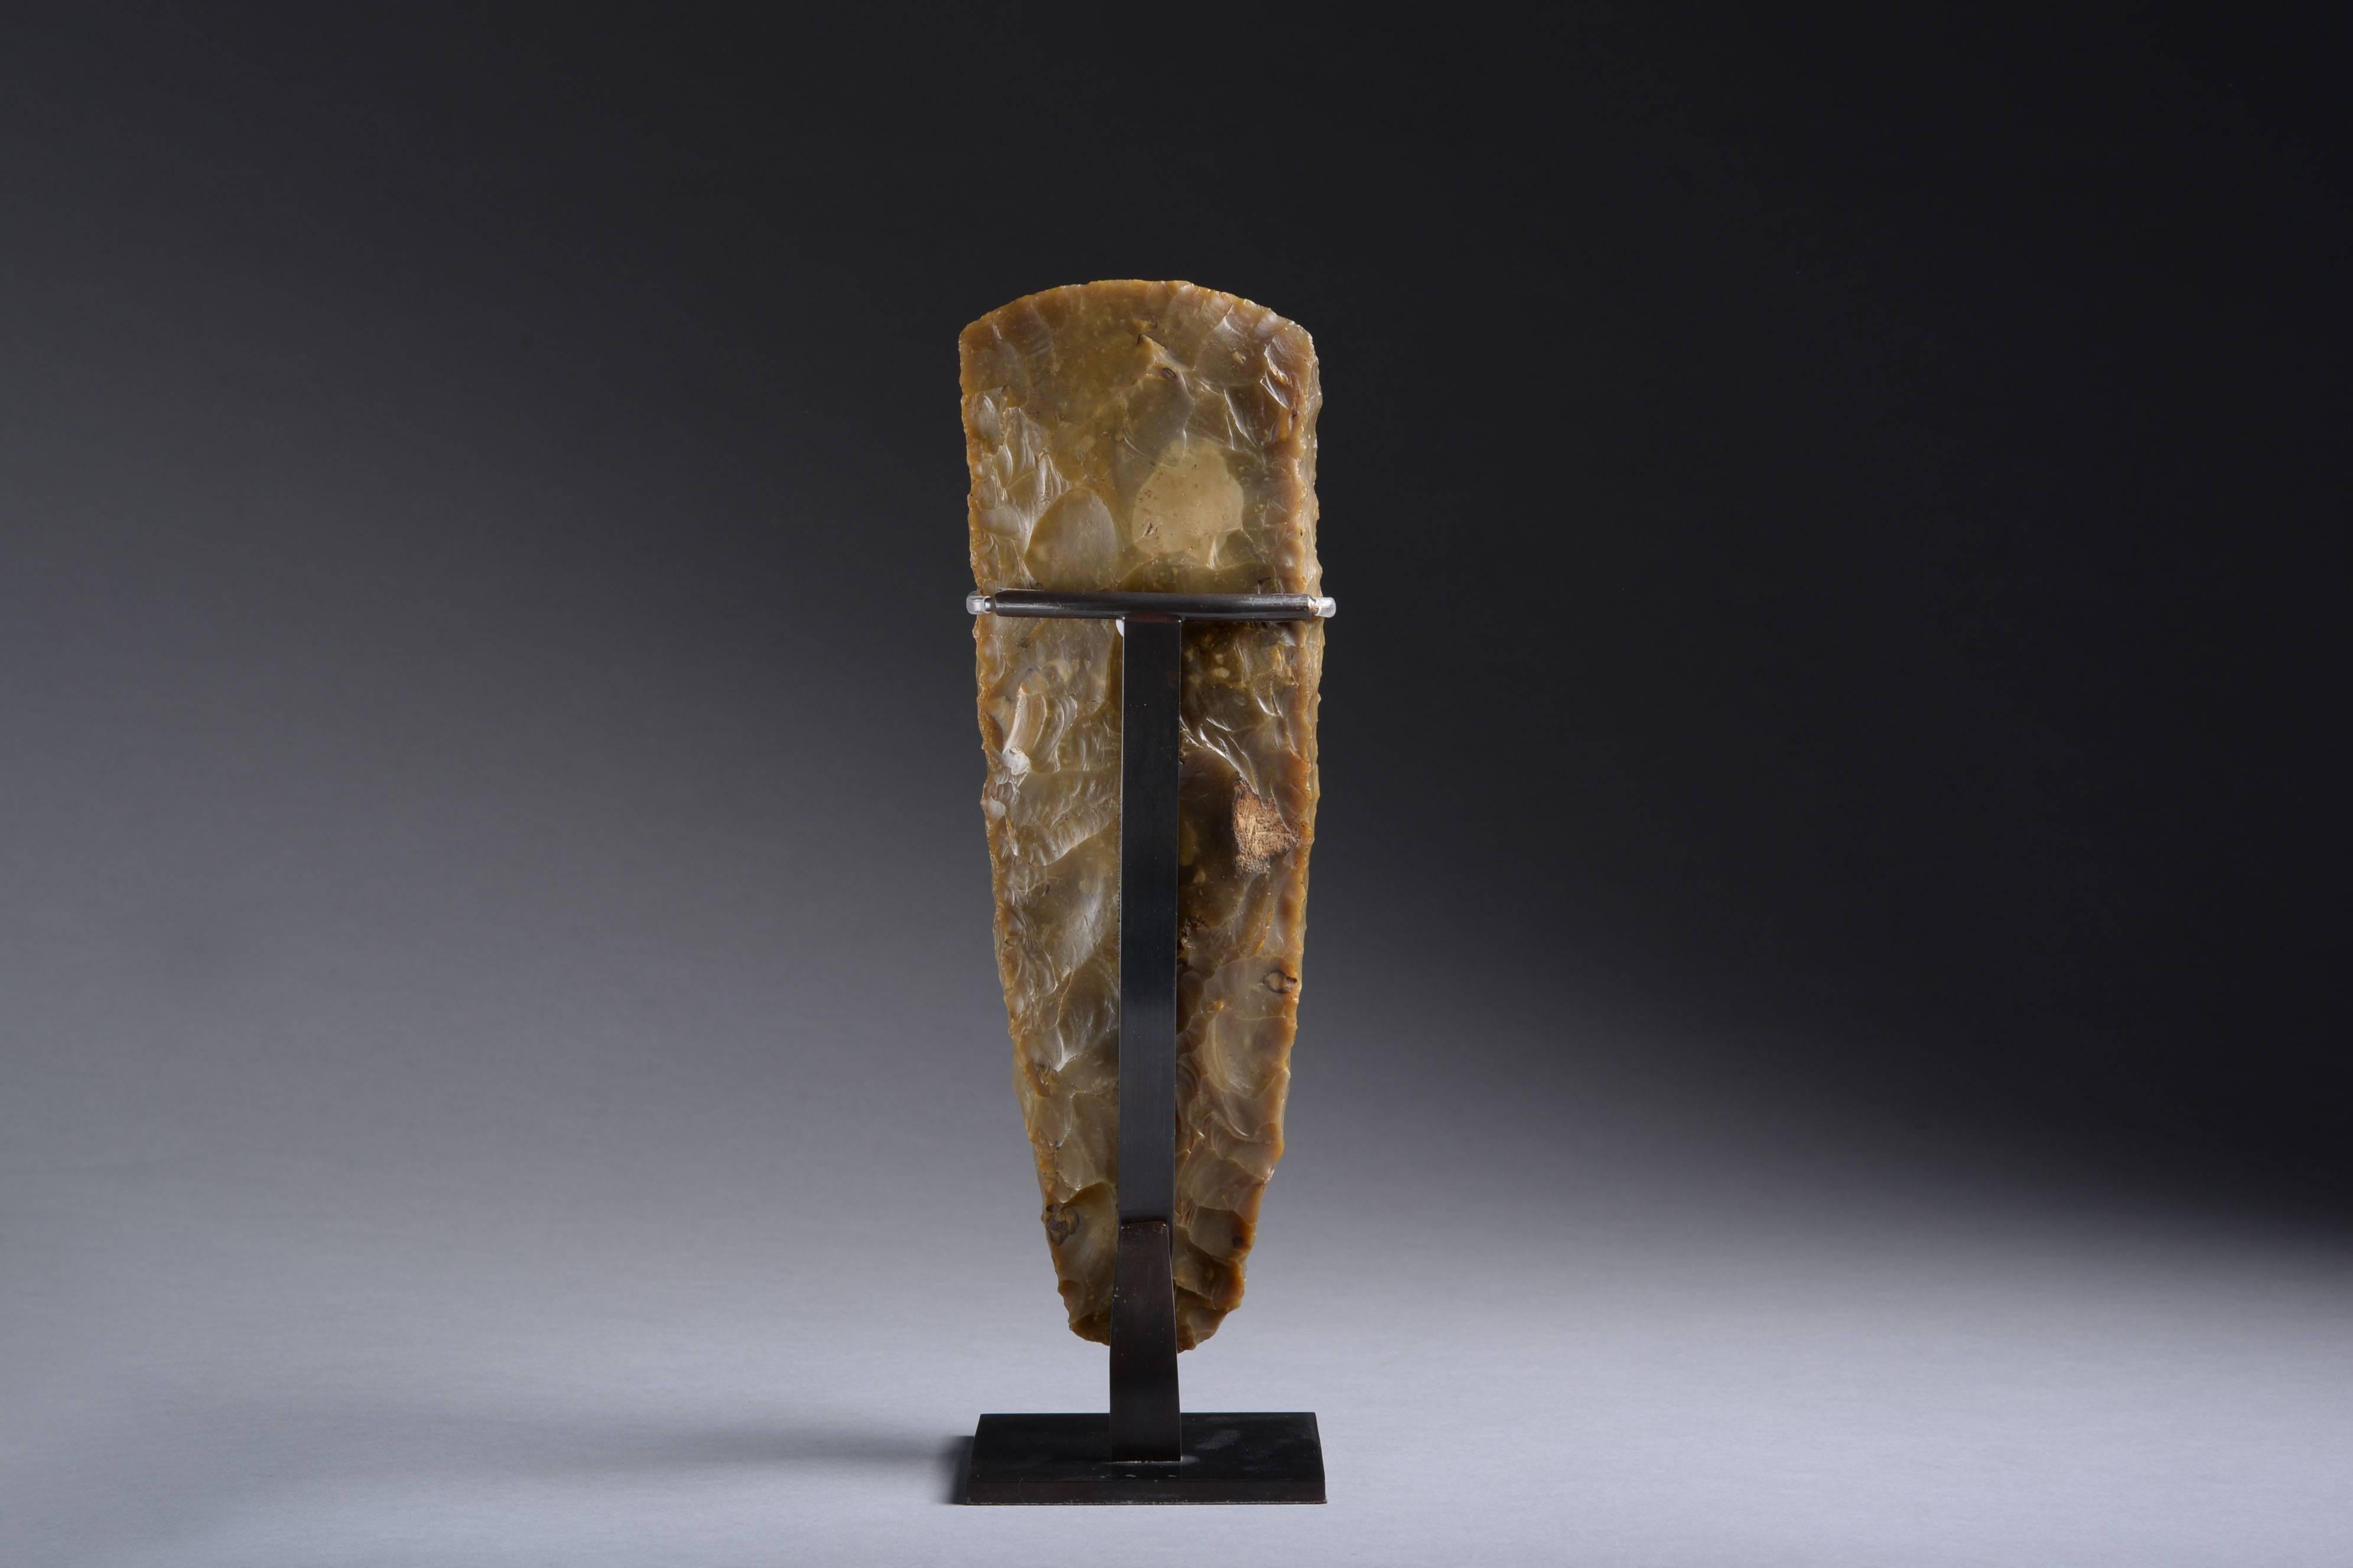 18th Century and Earlier Scandinavian Neolithic Flint Axe, 4000 BC